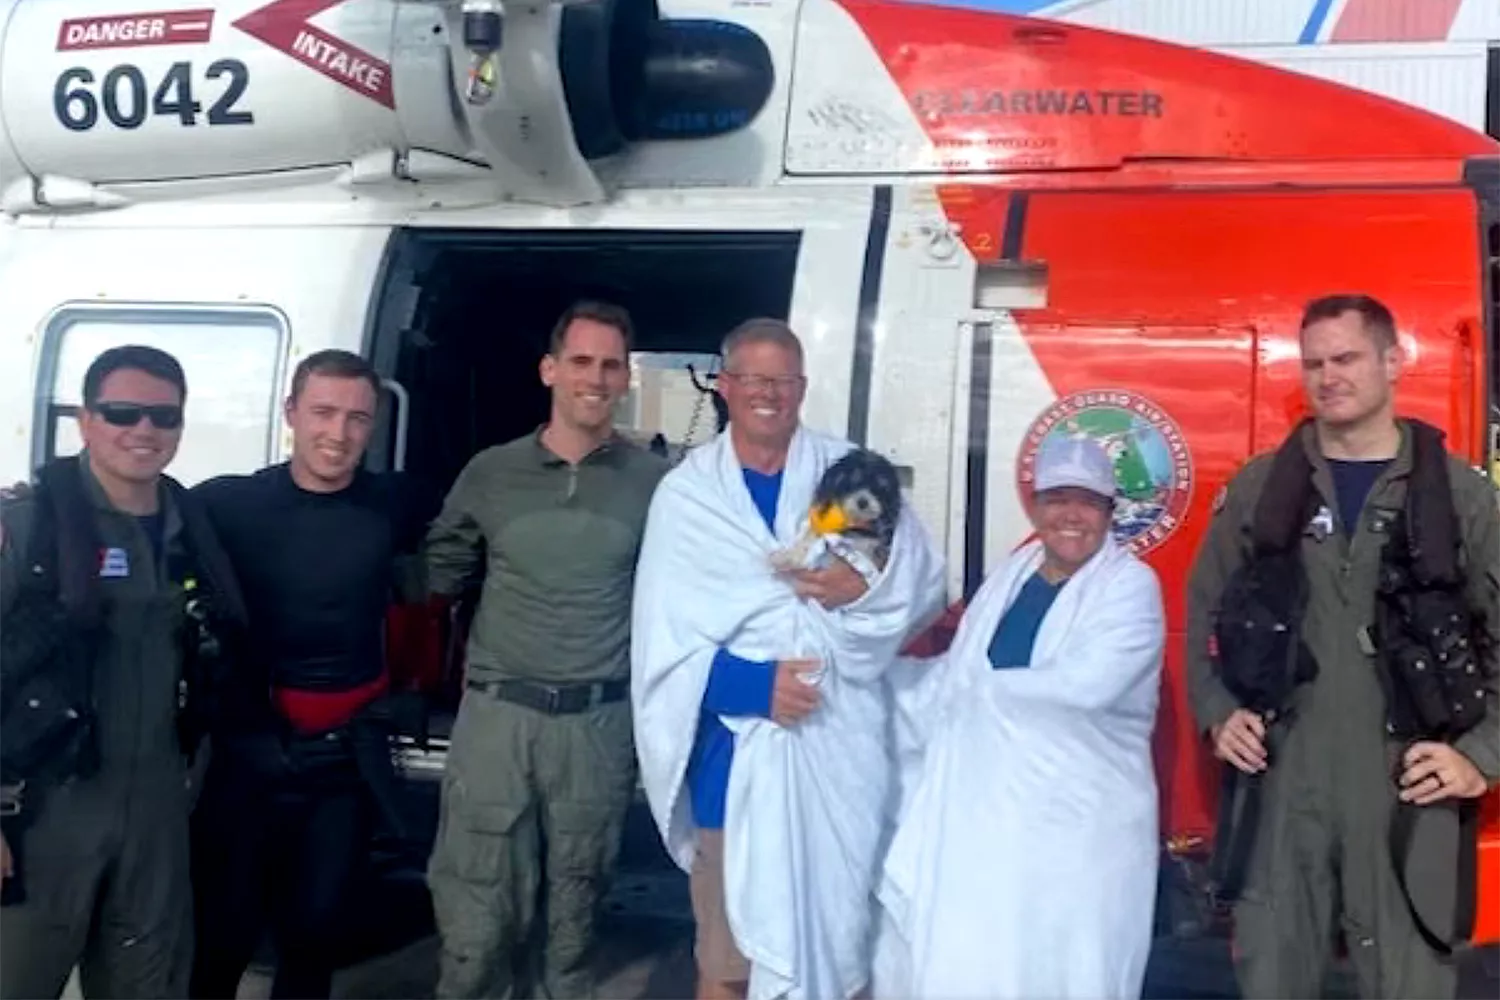 Safe and wrapped up after the couple and their pooch were airlifted to safety